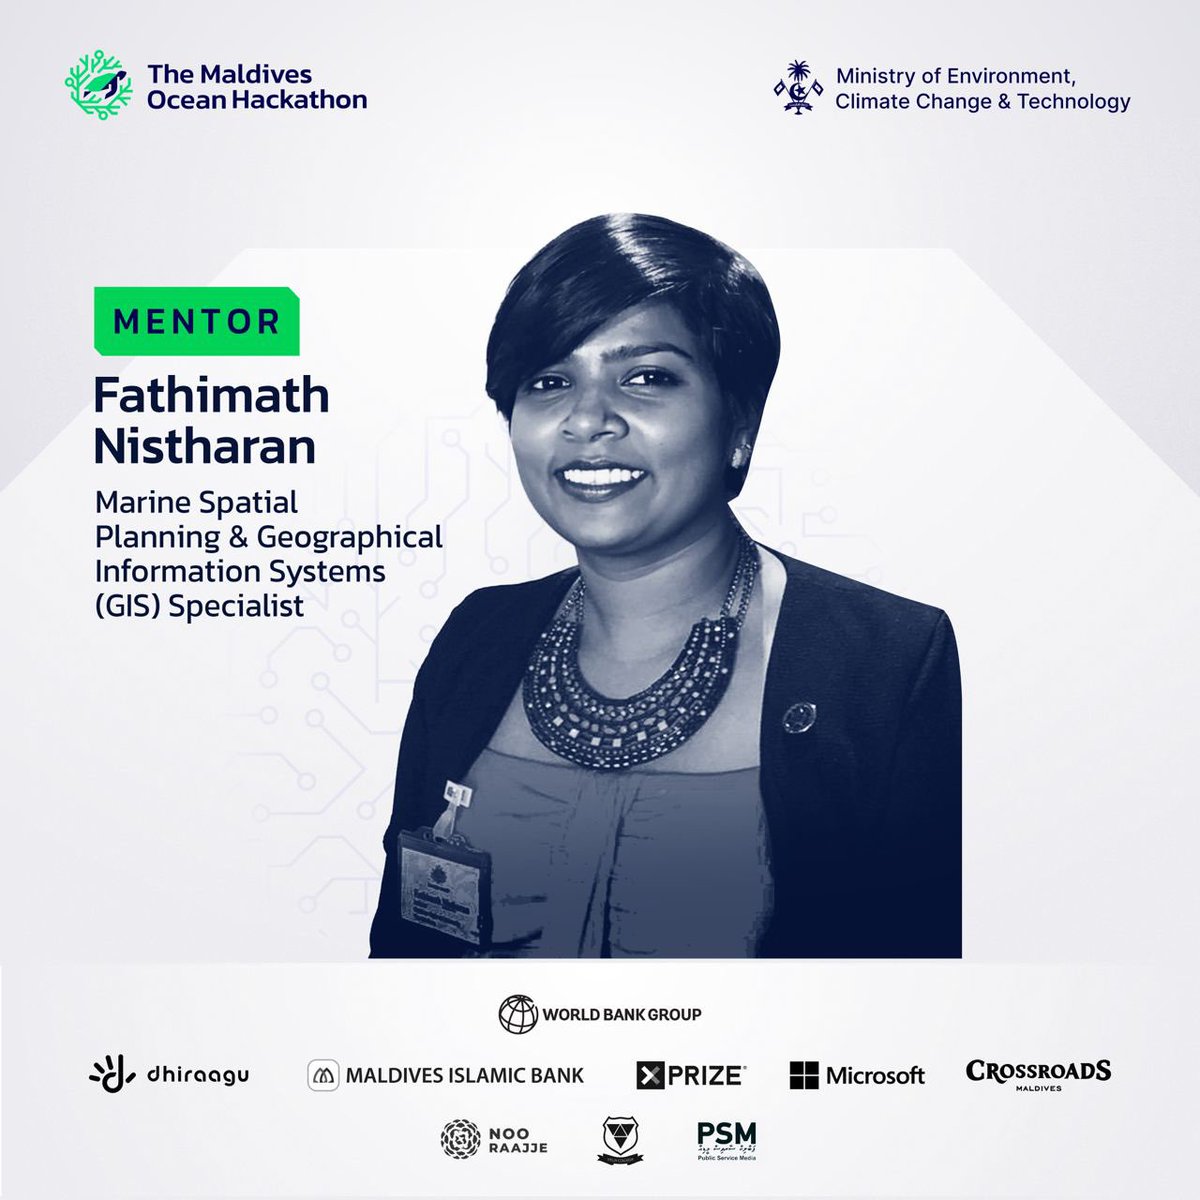 #MentorSpotlight: Fathimath Nistharan, @NooRaajje has vast experience in Marine Spatial Planning, coral reef mapping, lecturing & GIS. Established Rasdhoo-Madivaru Protected Area. Holds advanced degrees in Environmental Management & Computer Science.